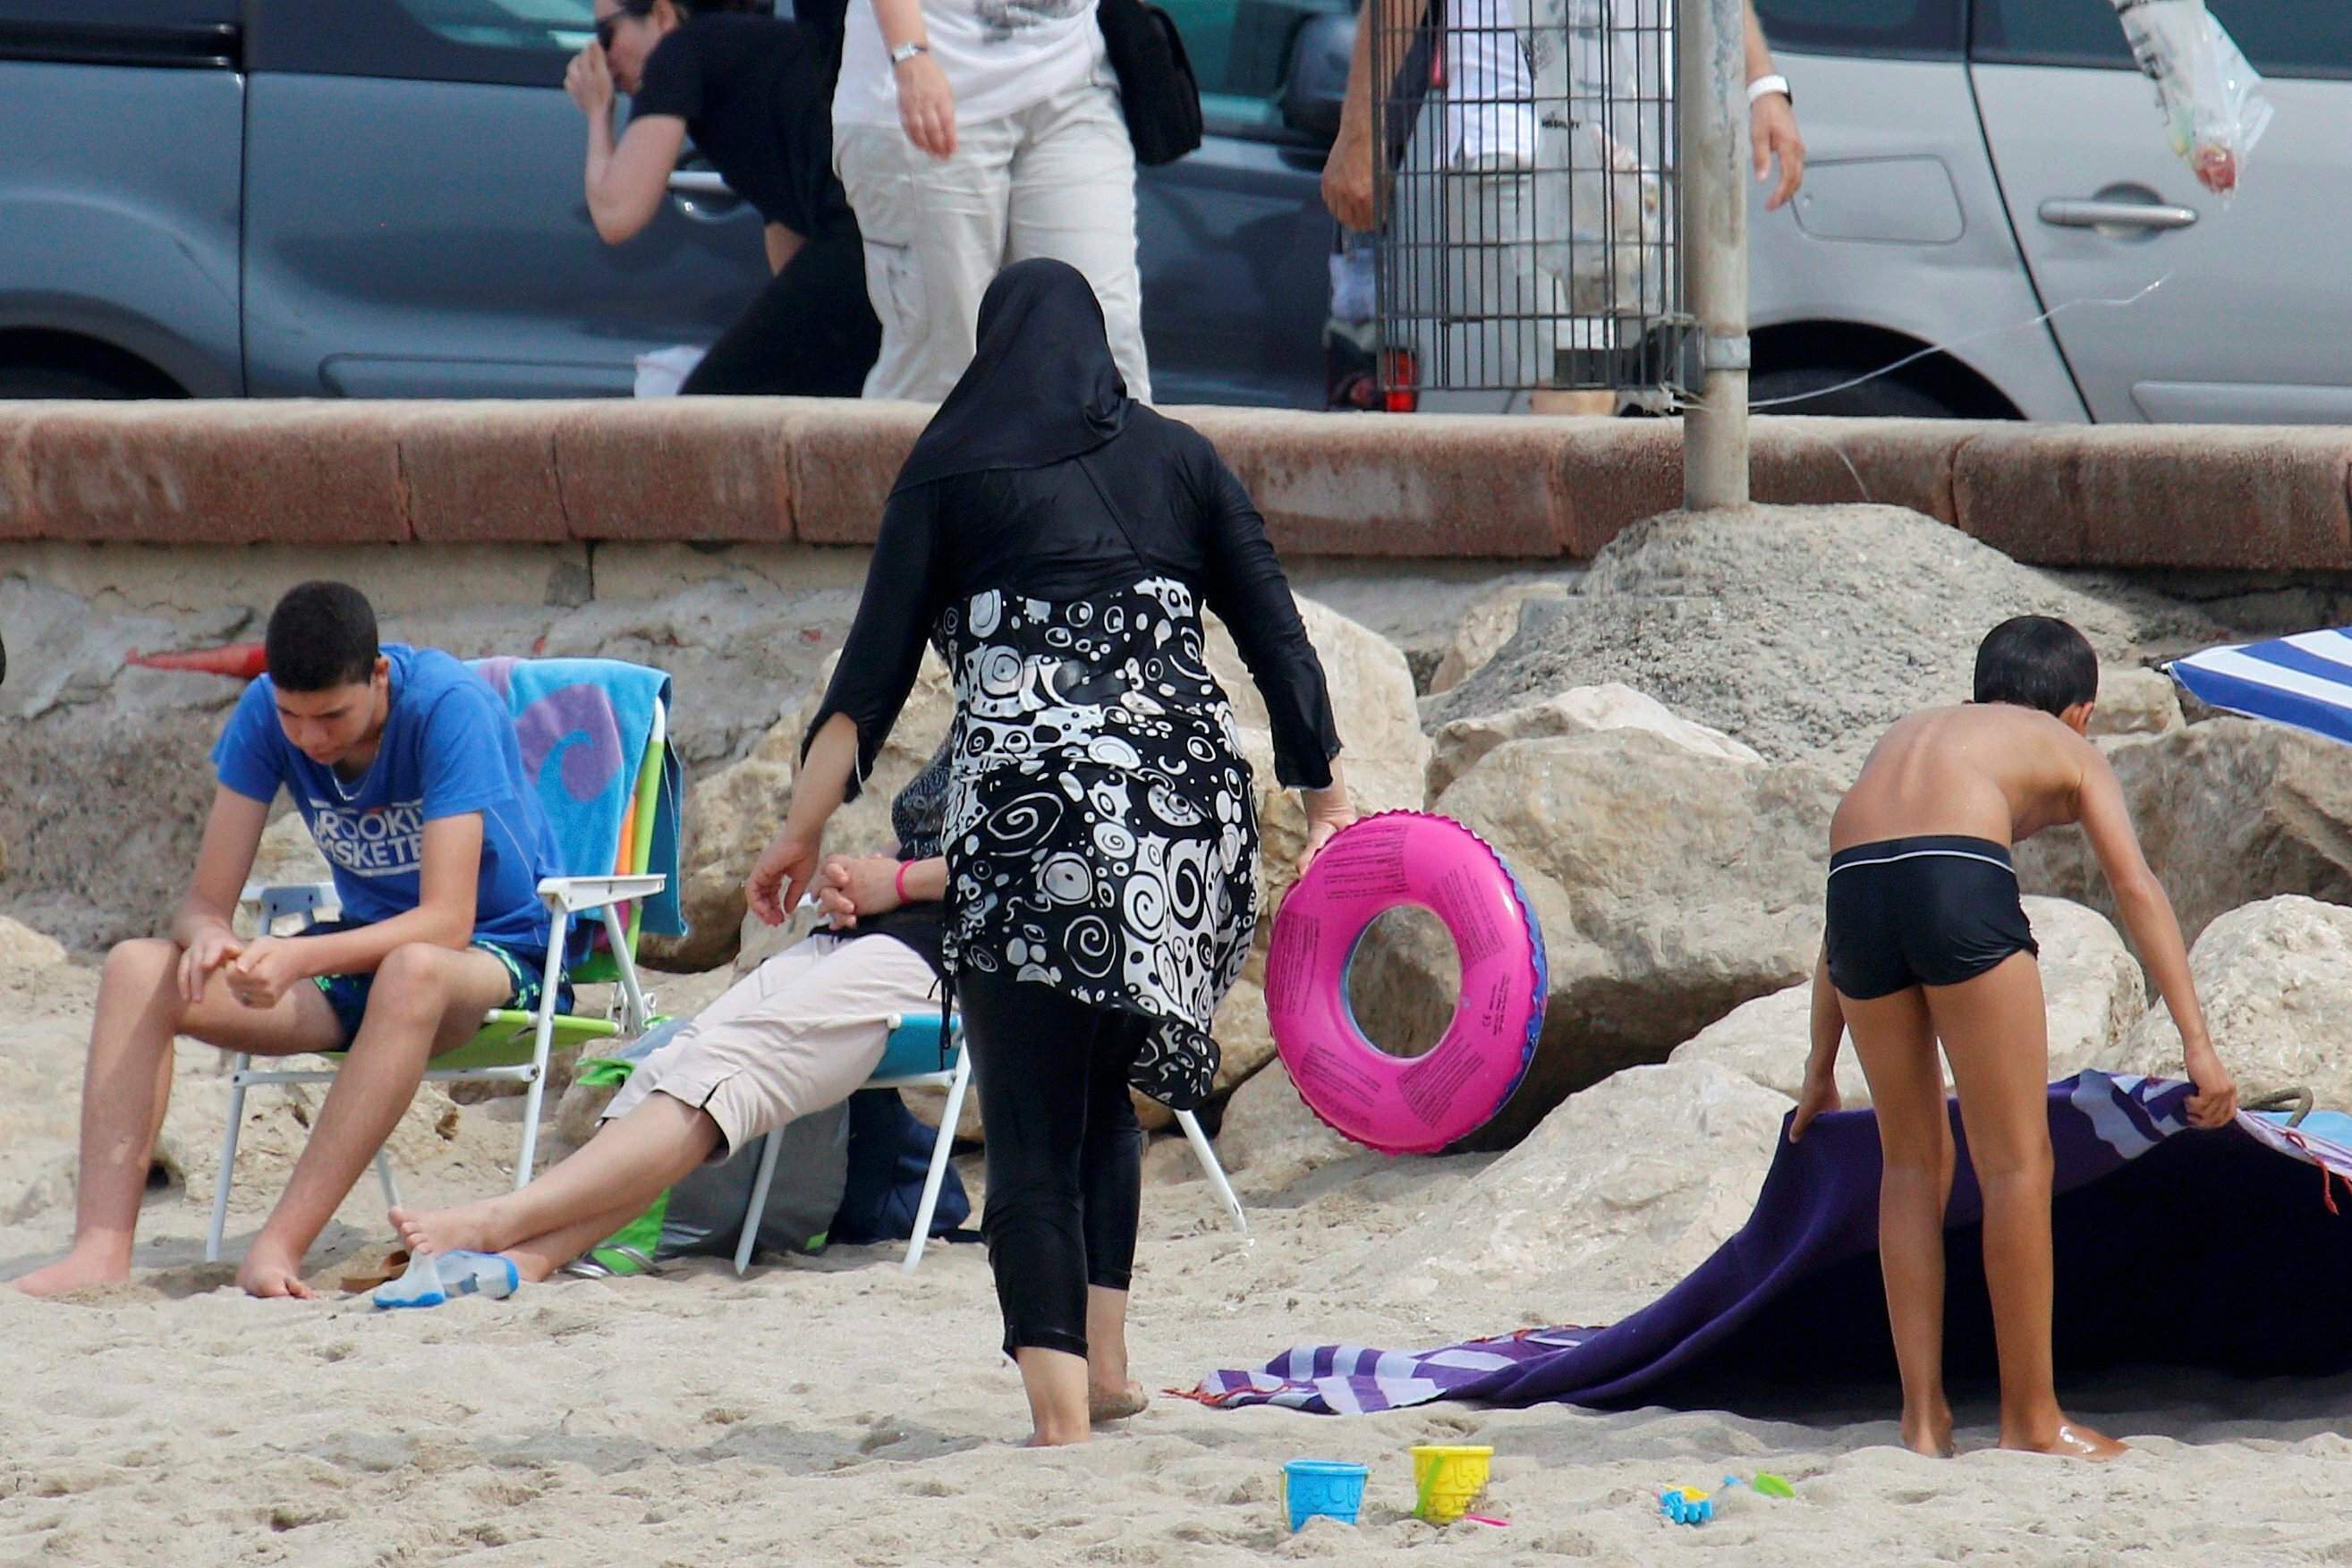 Why Are Burkinis Banned?